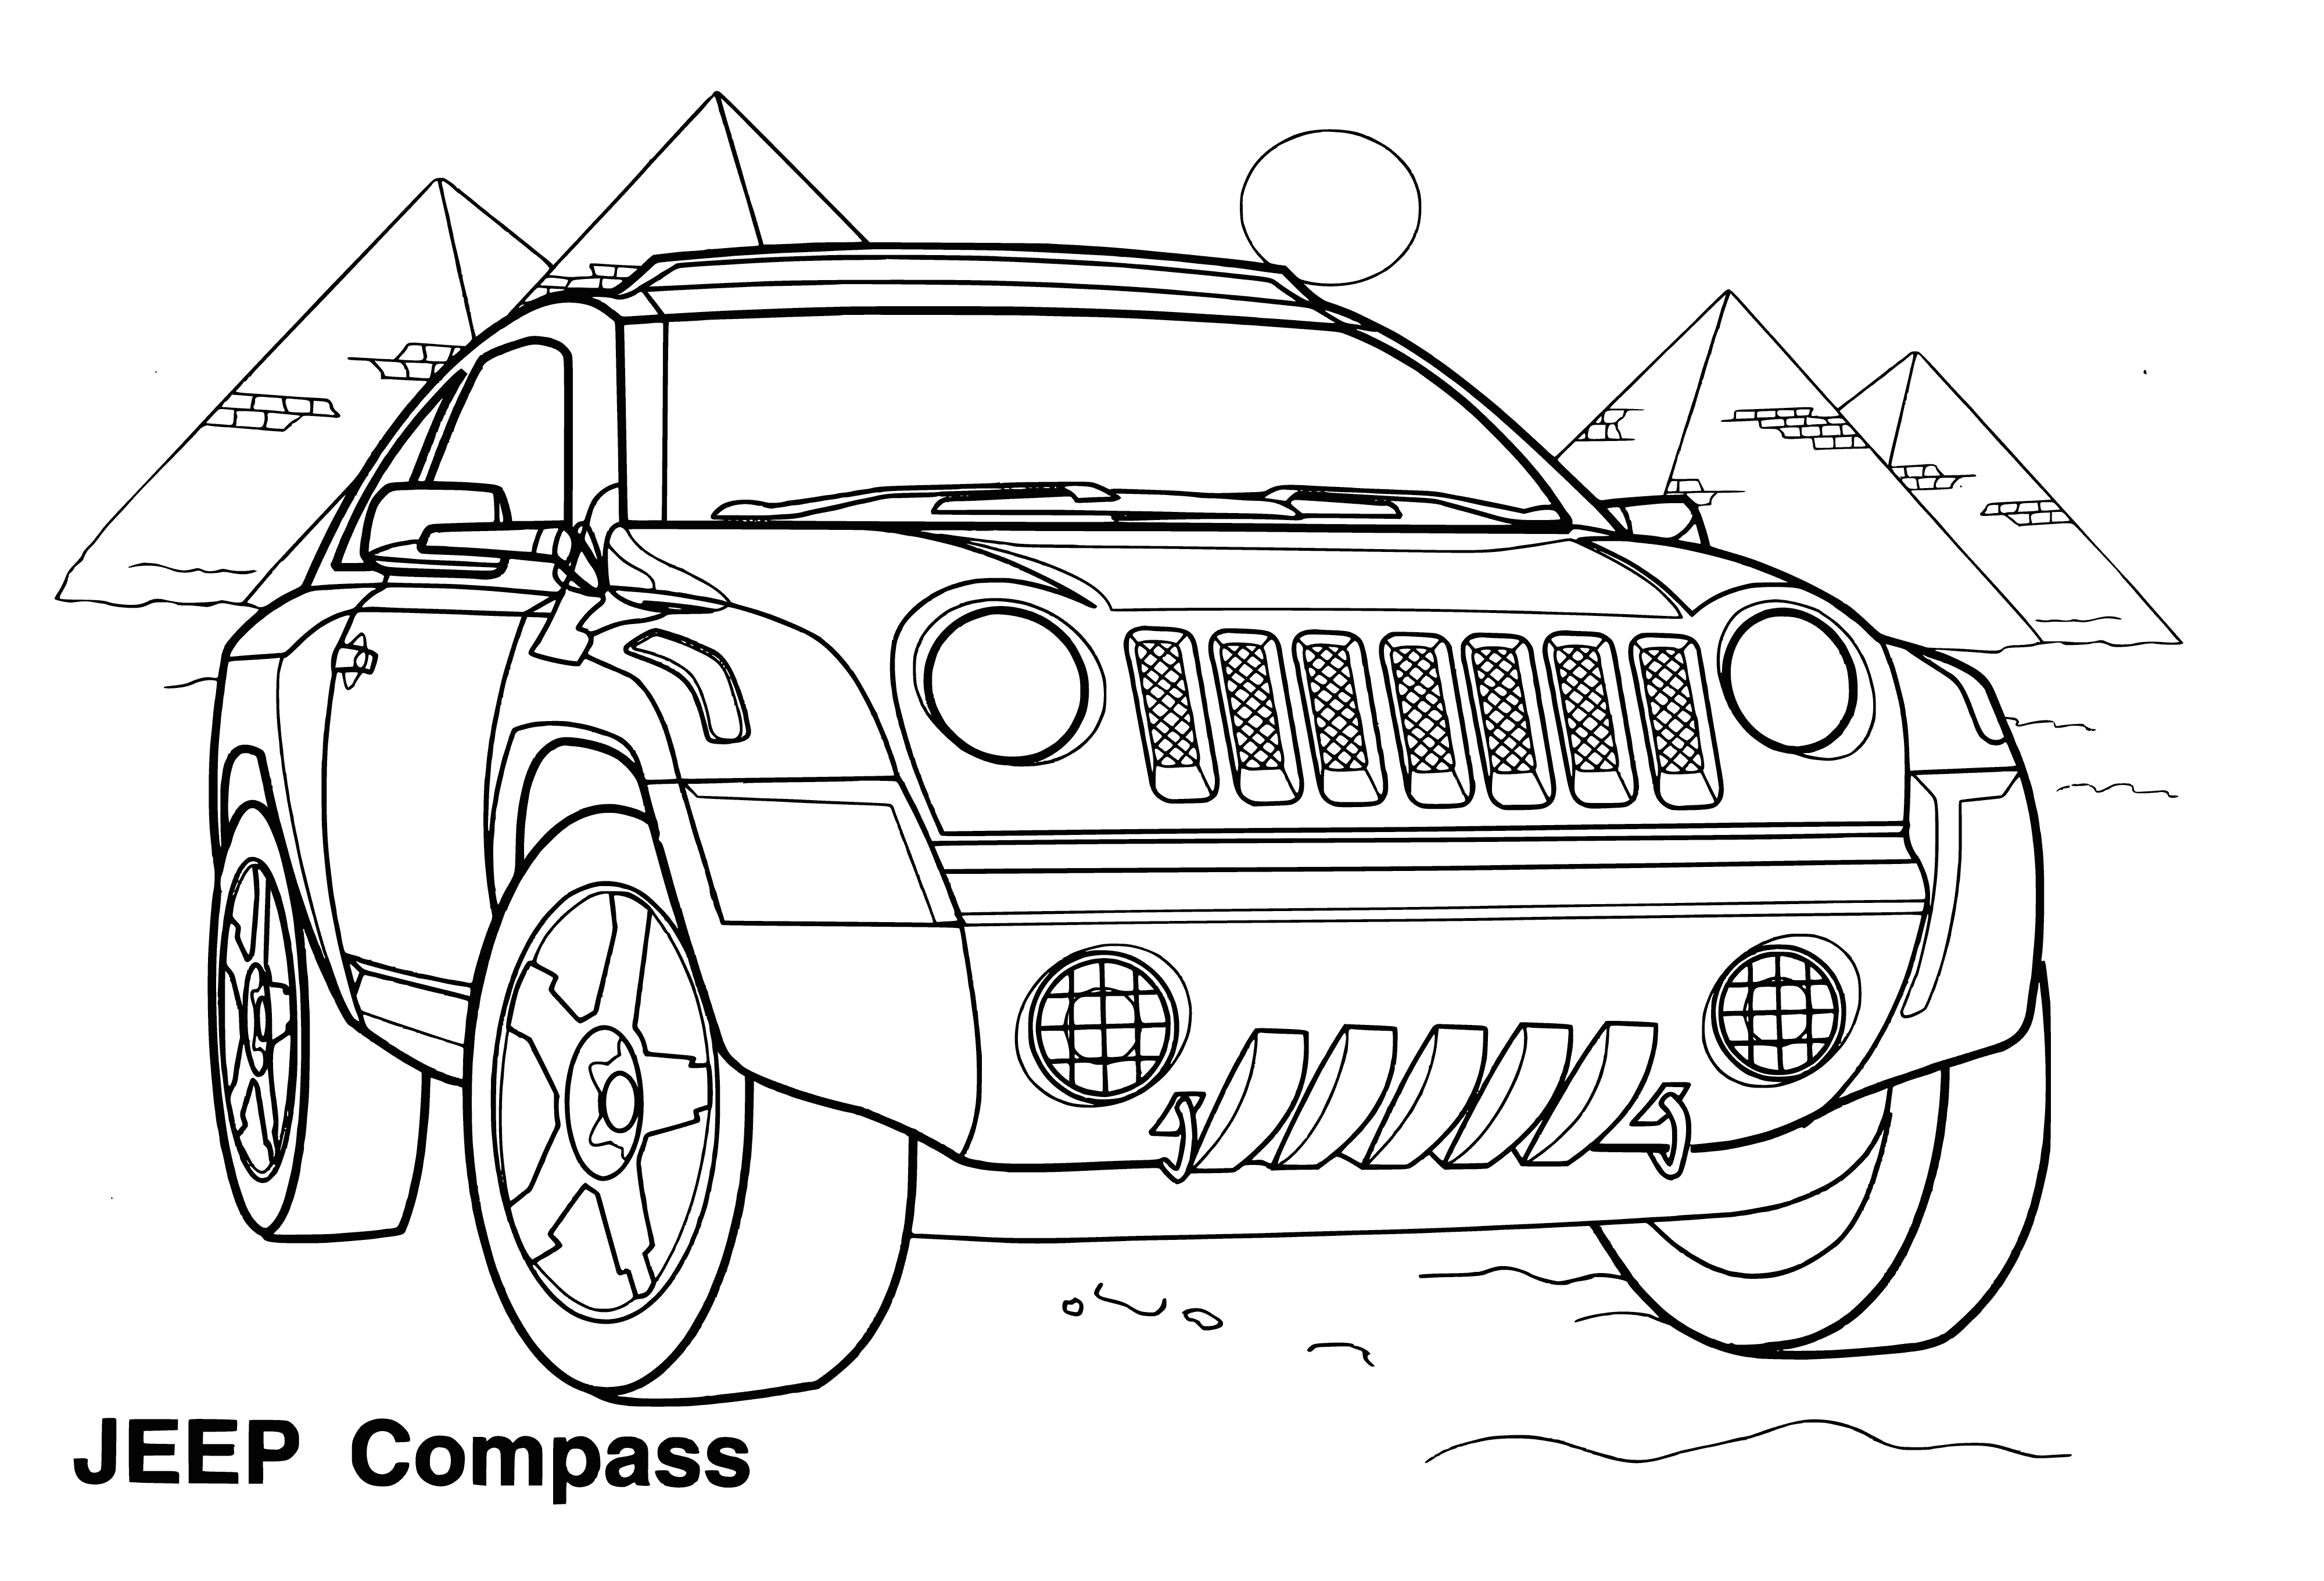 coloring page: Three jeeps: one orange, one green, and one blue, each with different hard/soft tops.